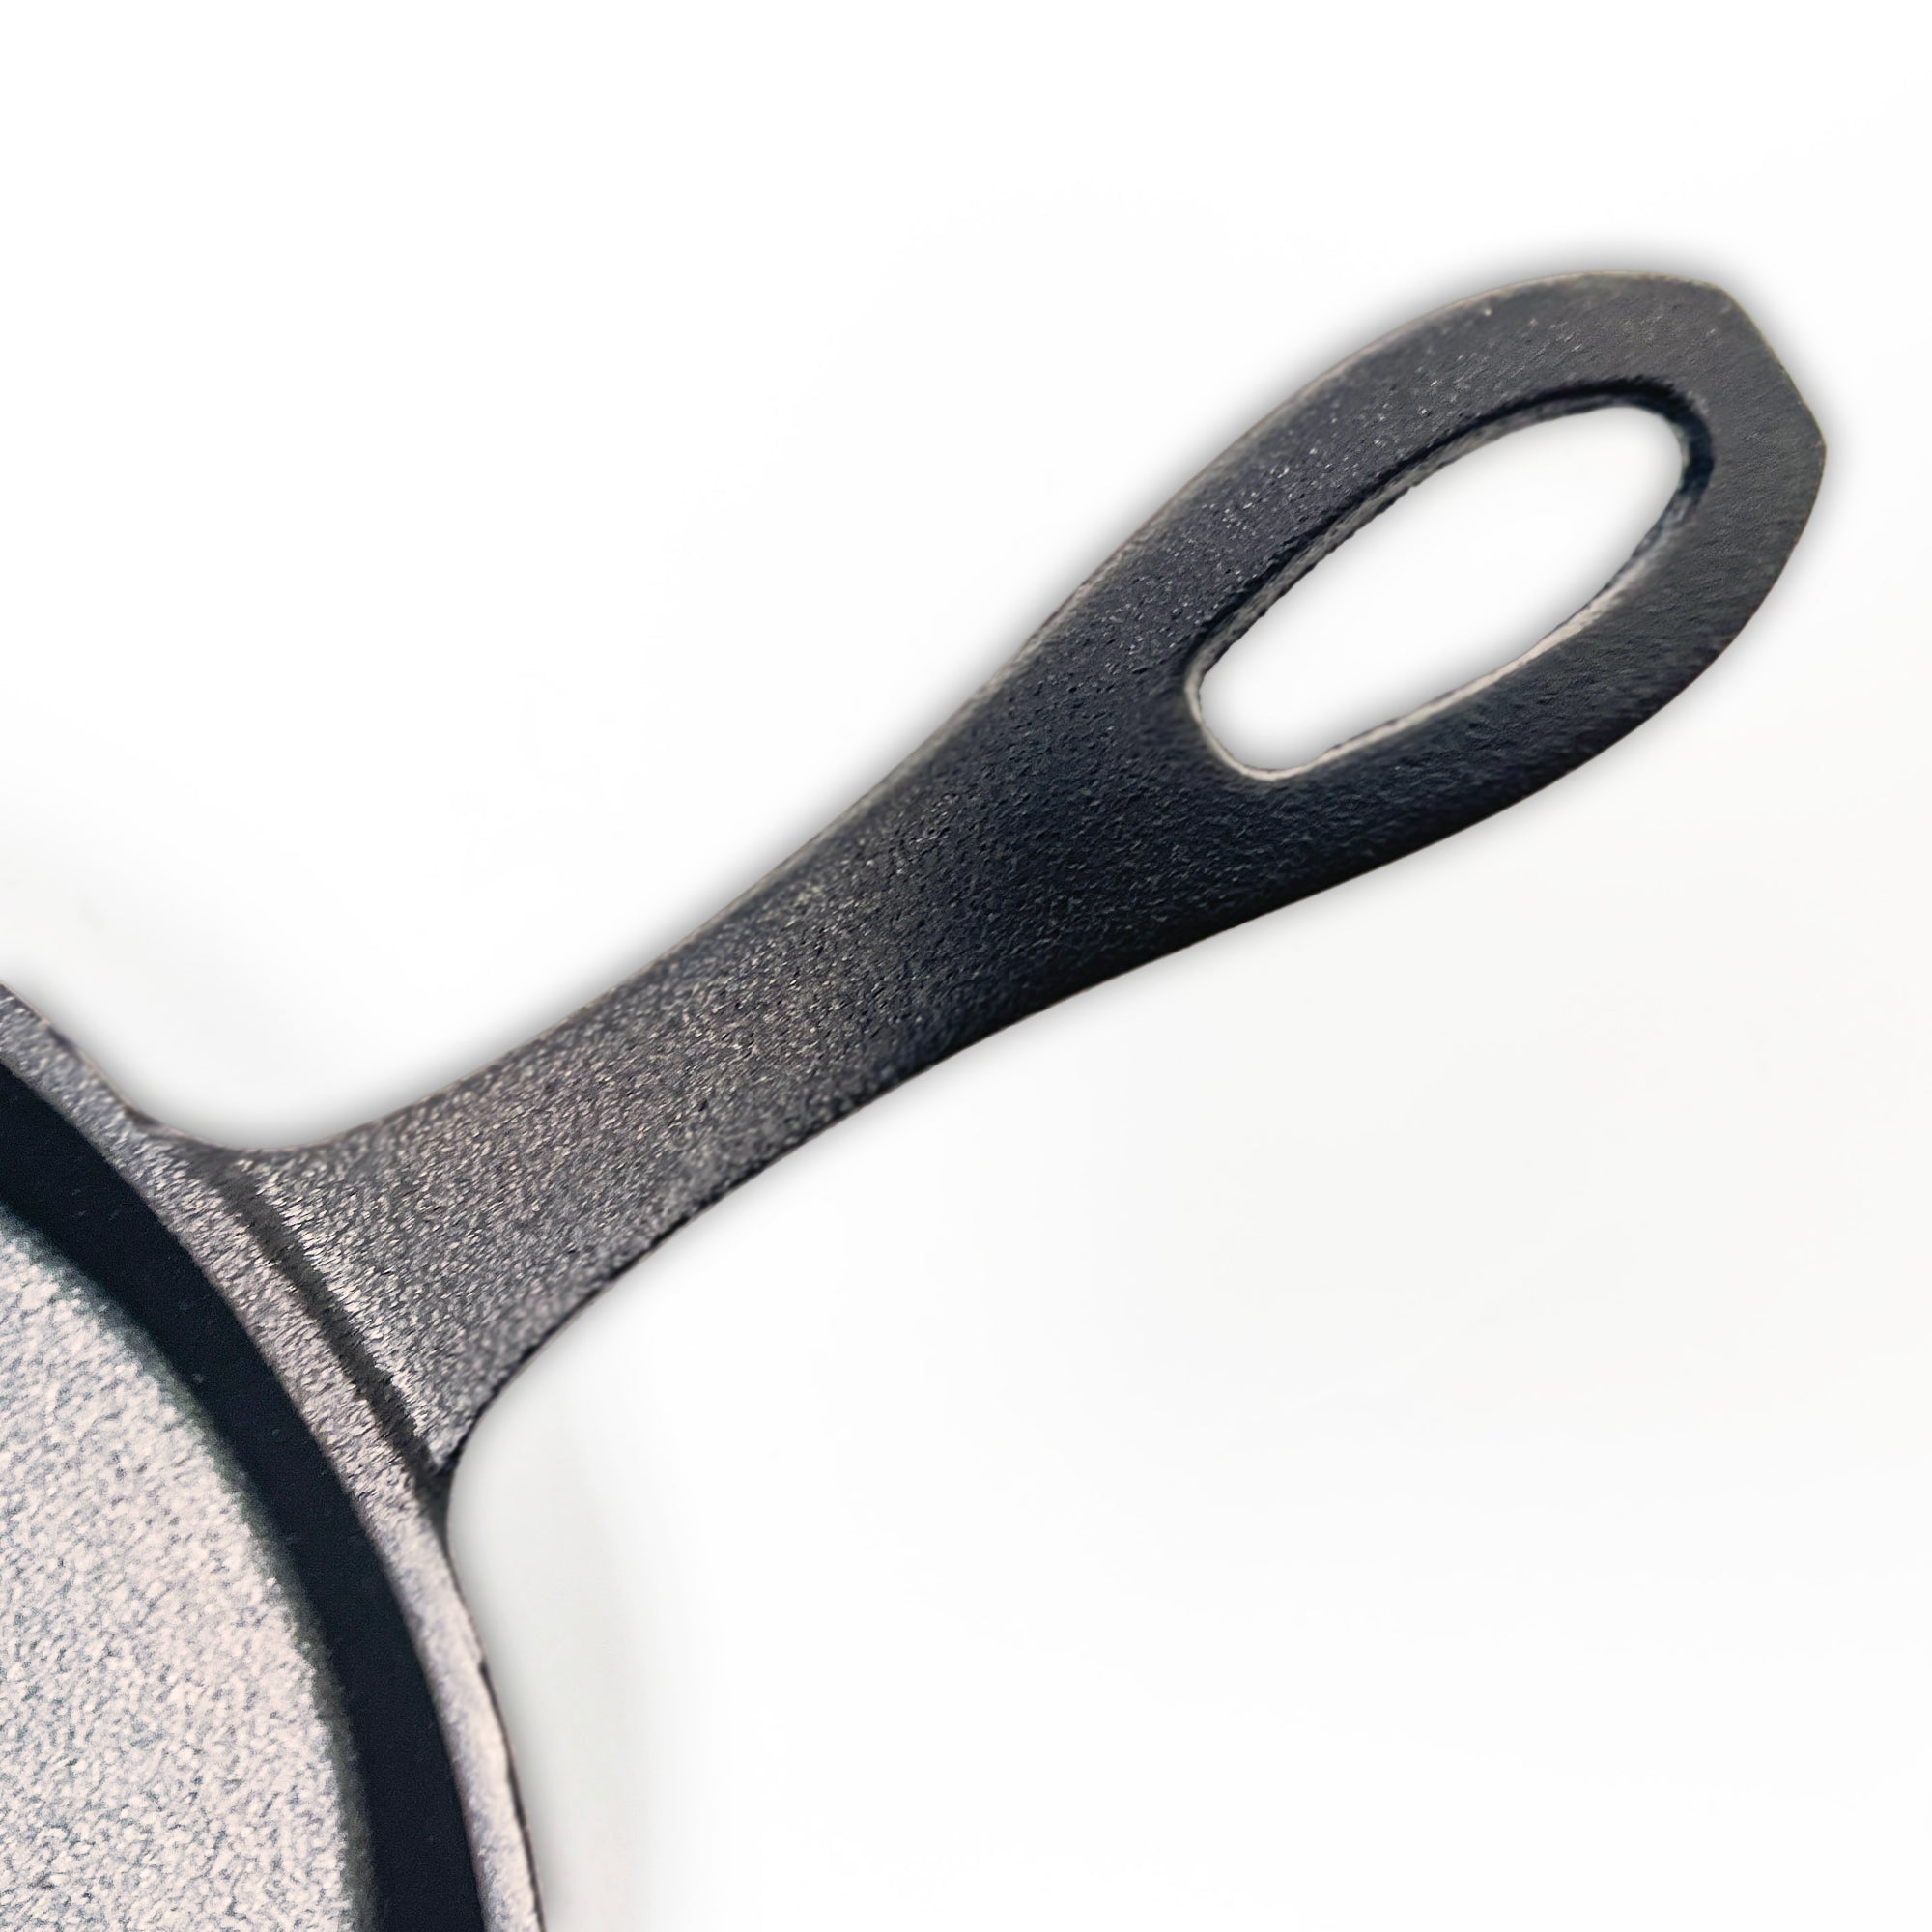 8-in Cast Iron Skillet